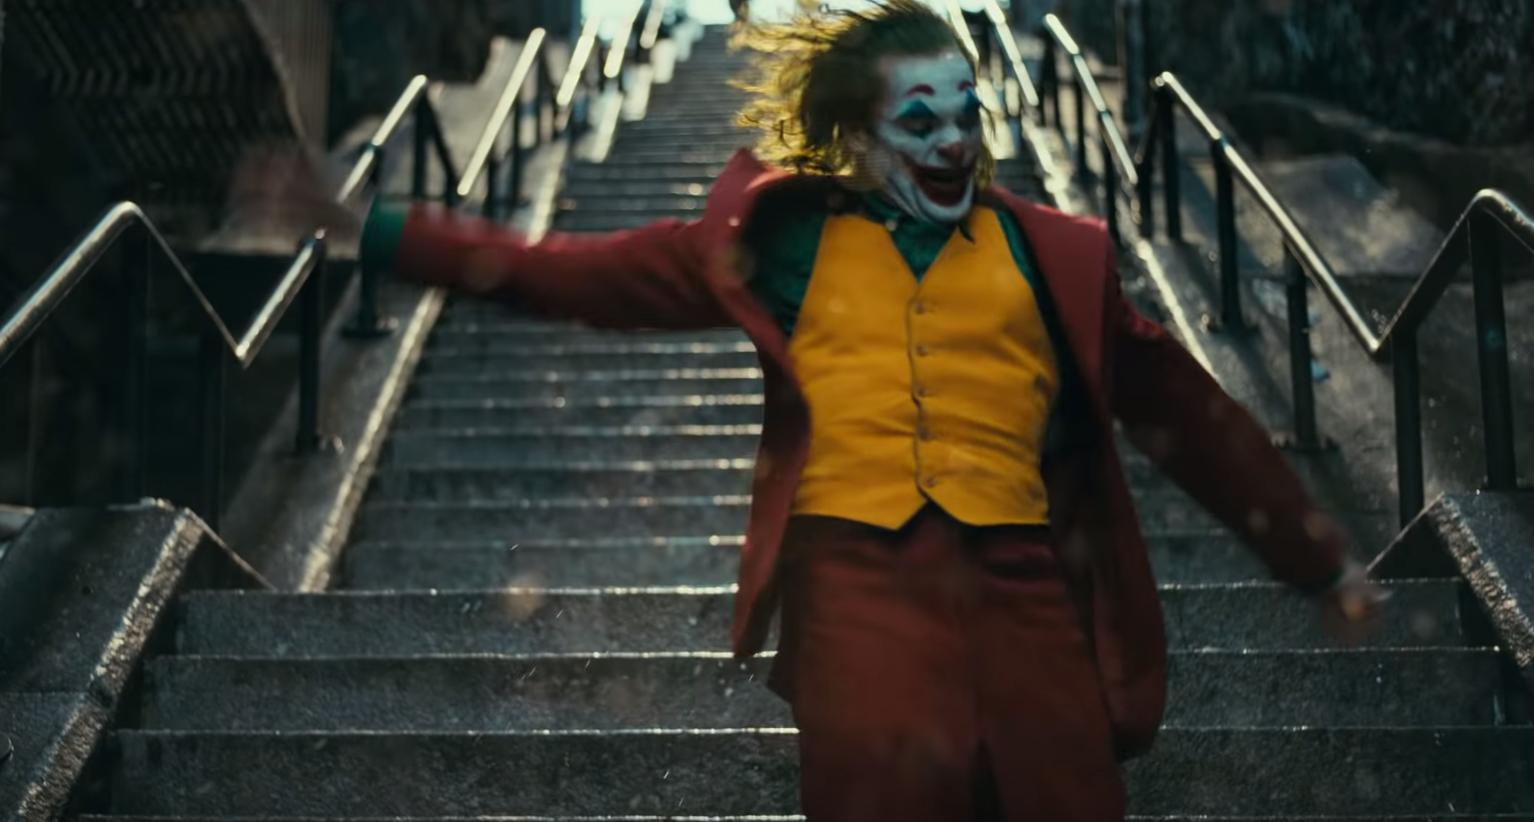 The 'Joker' Stair Scene Controversy, Explained